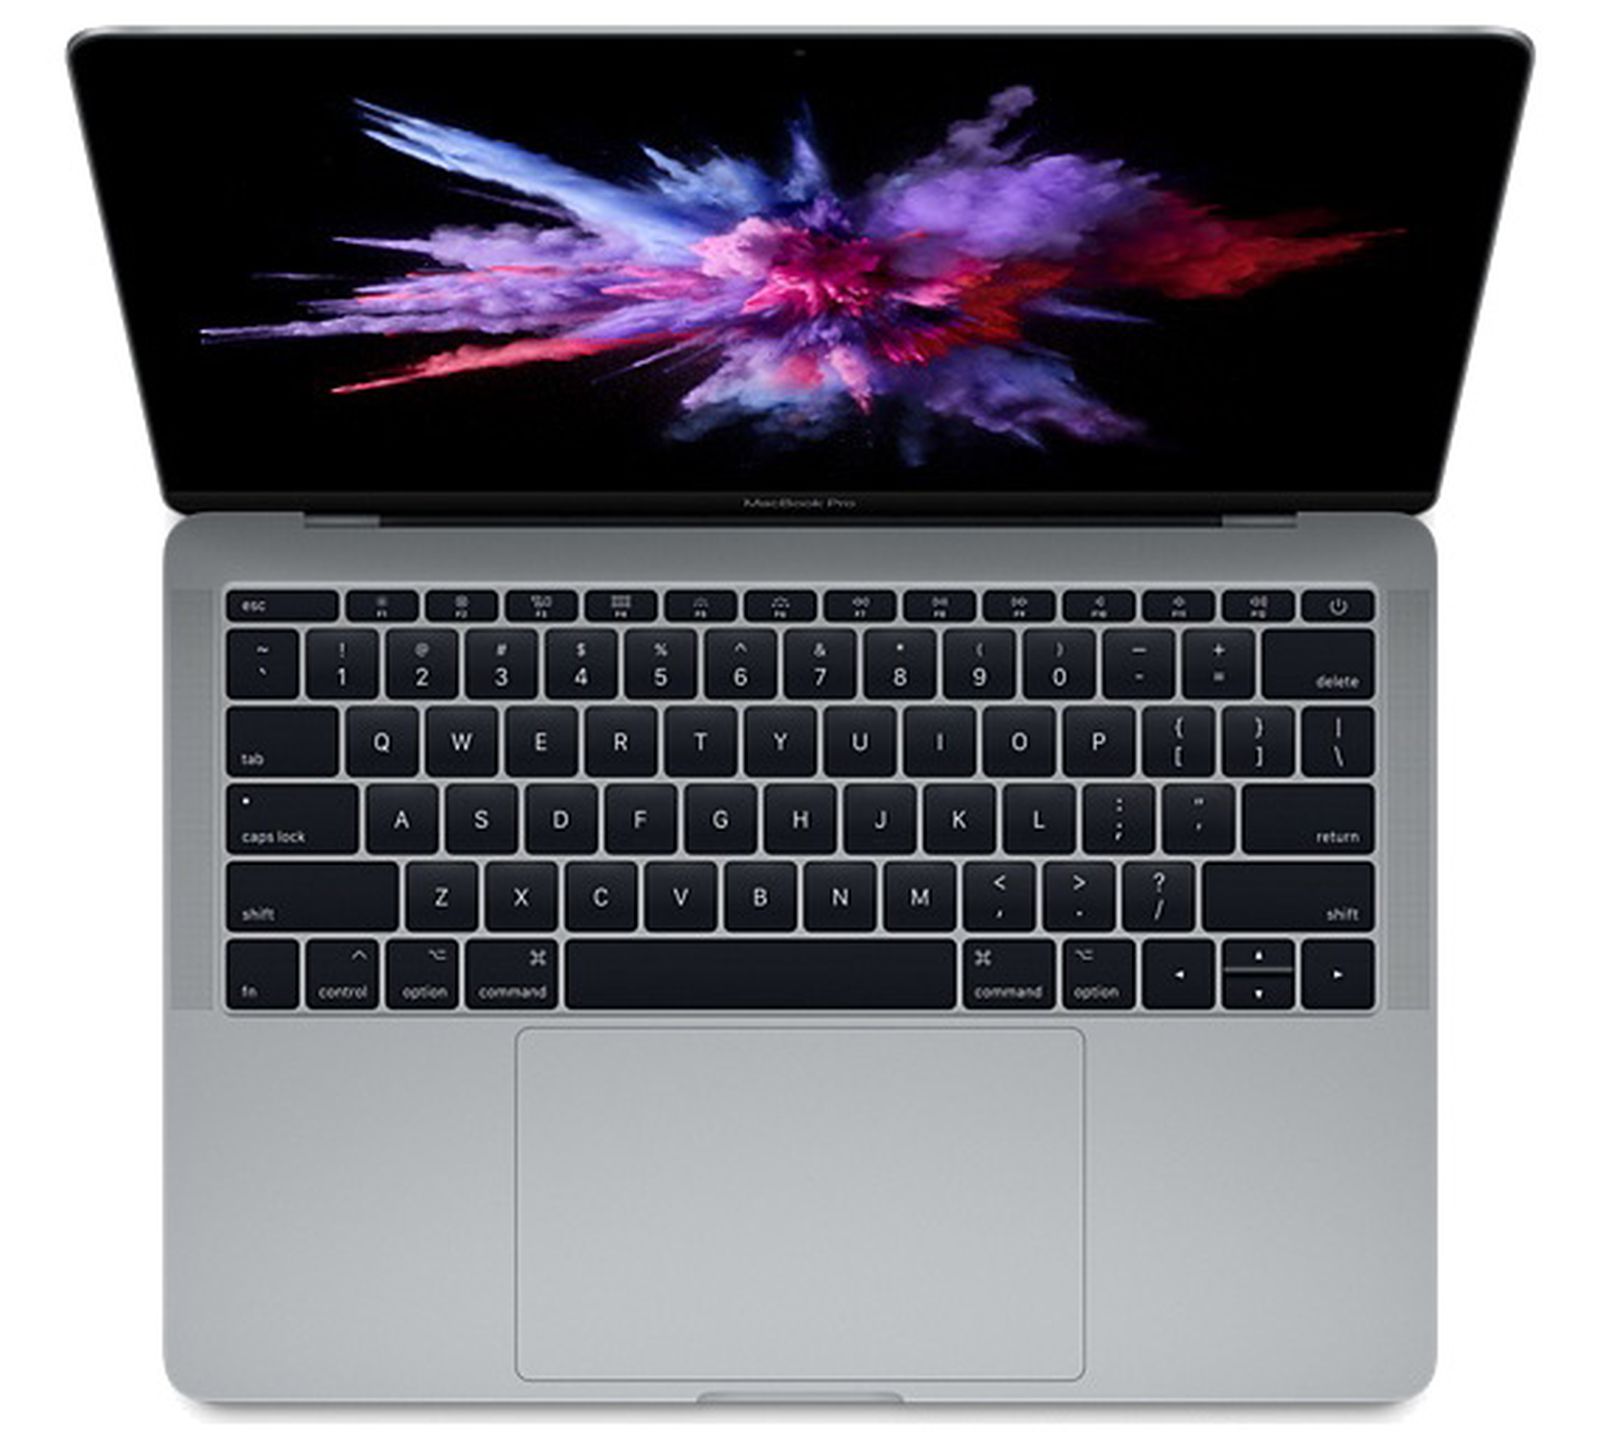 When will apple upgrade the macbook pro without touchbar astra for men